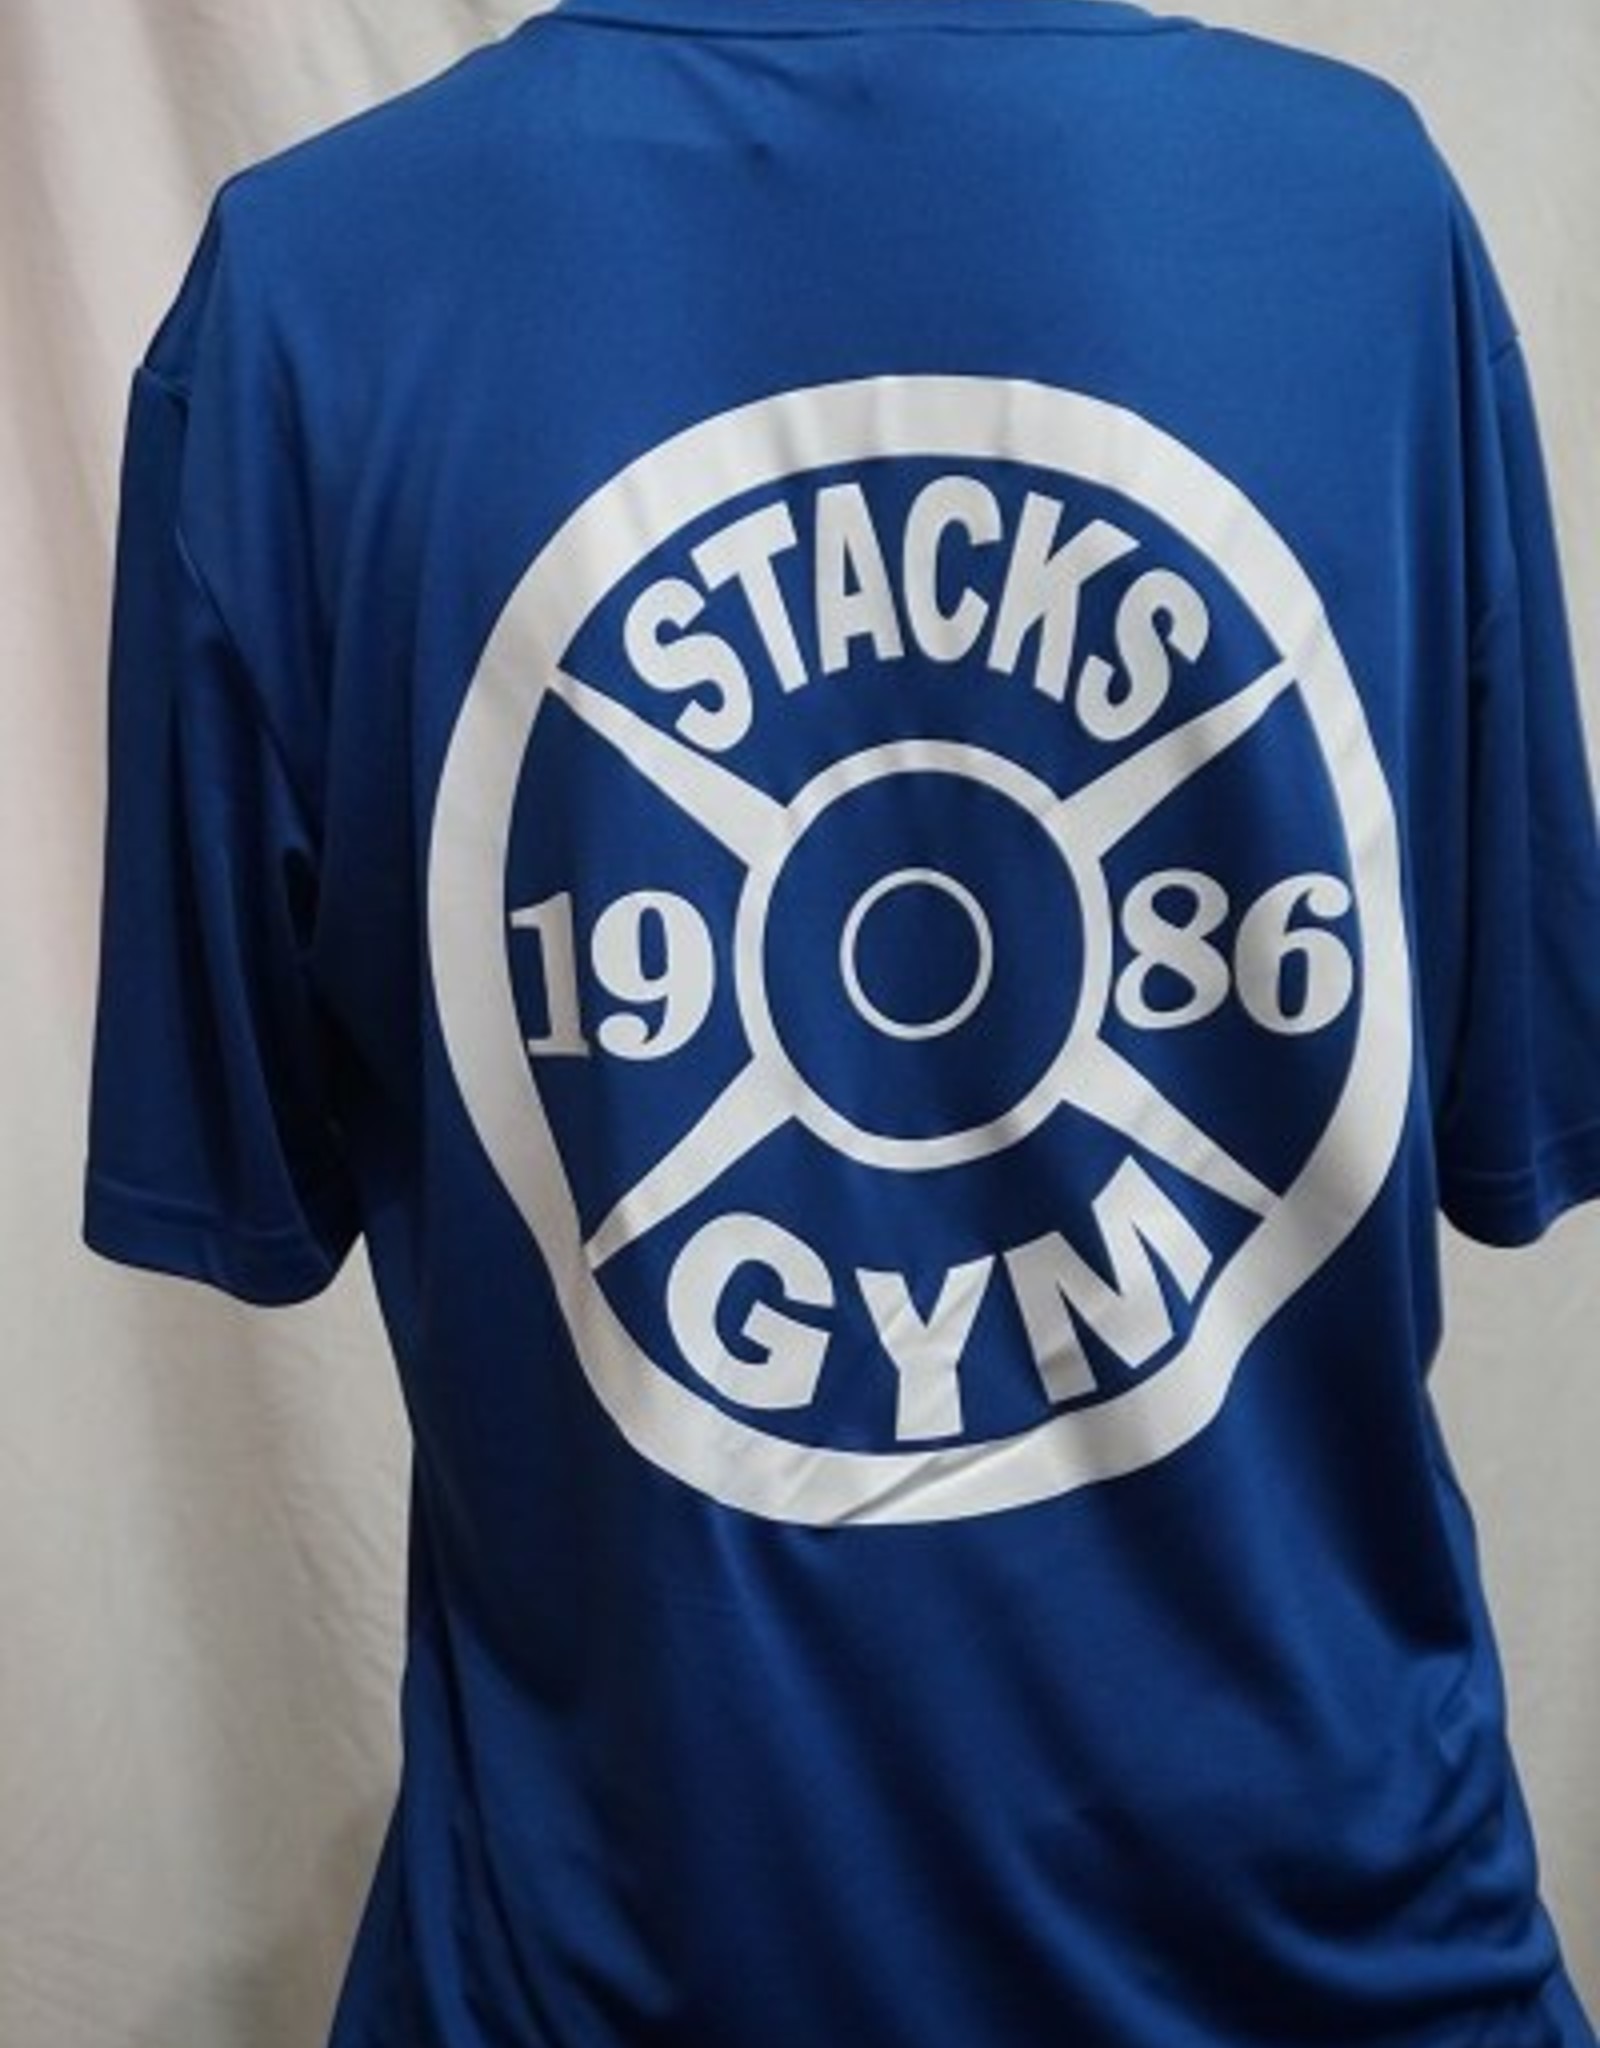 Stack's Gym Dry Fit T-Shirts